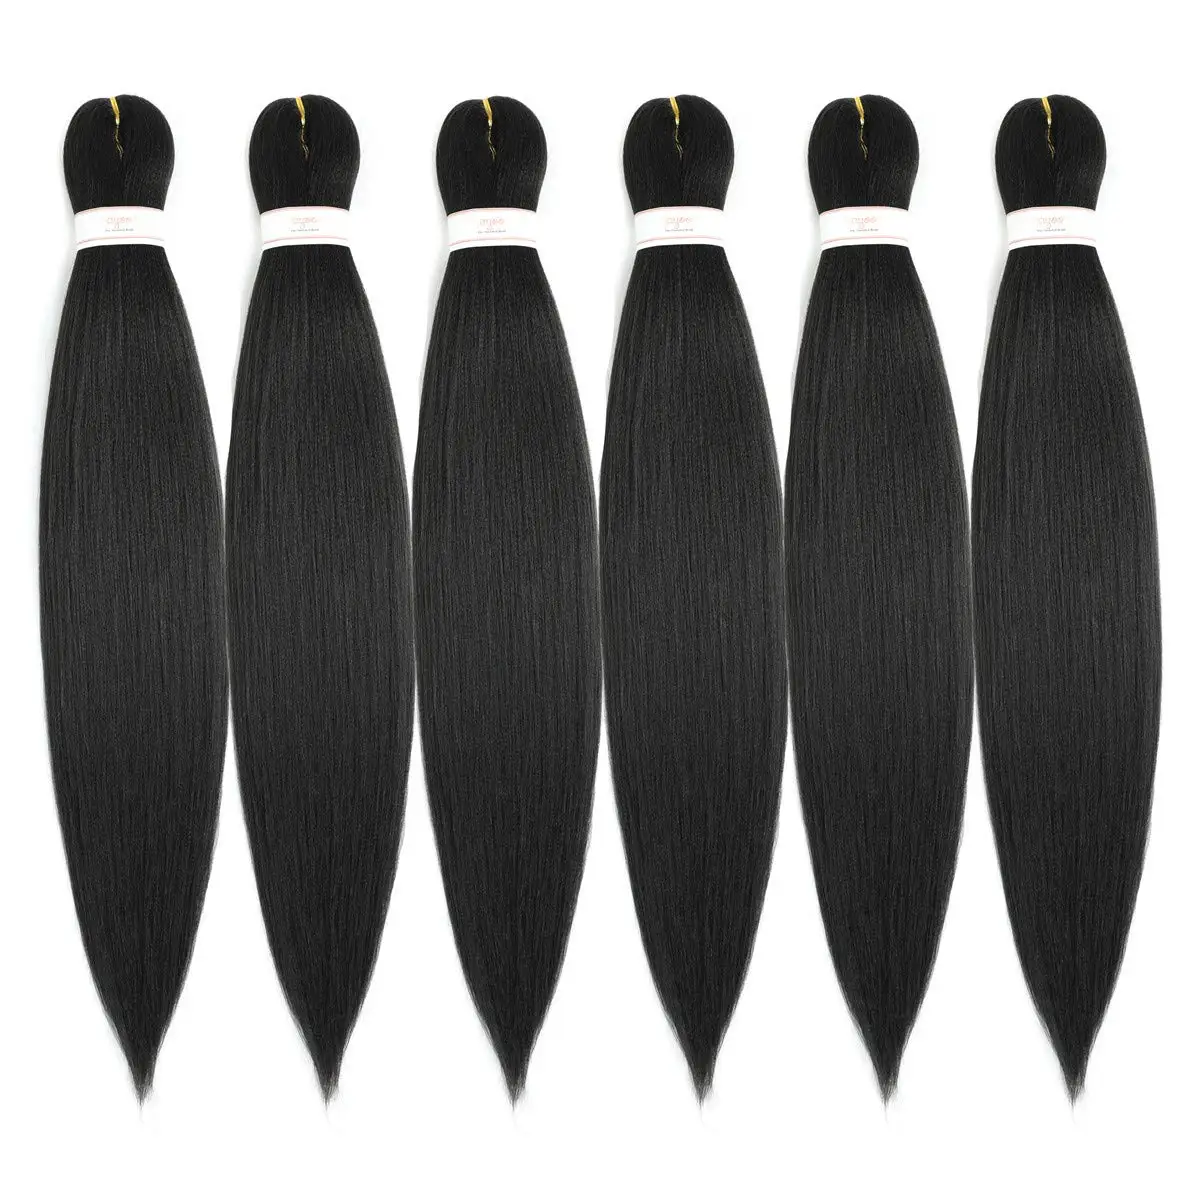 

Wholesale Ombre Color Synthetic Jumbo ez braid bulk yaki private label pre stretched braiding hair extensions